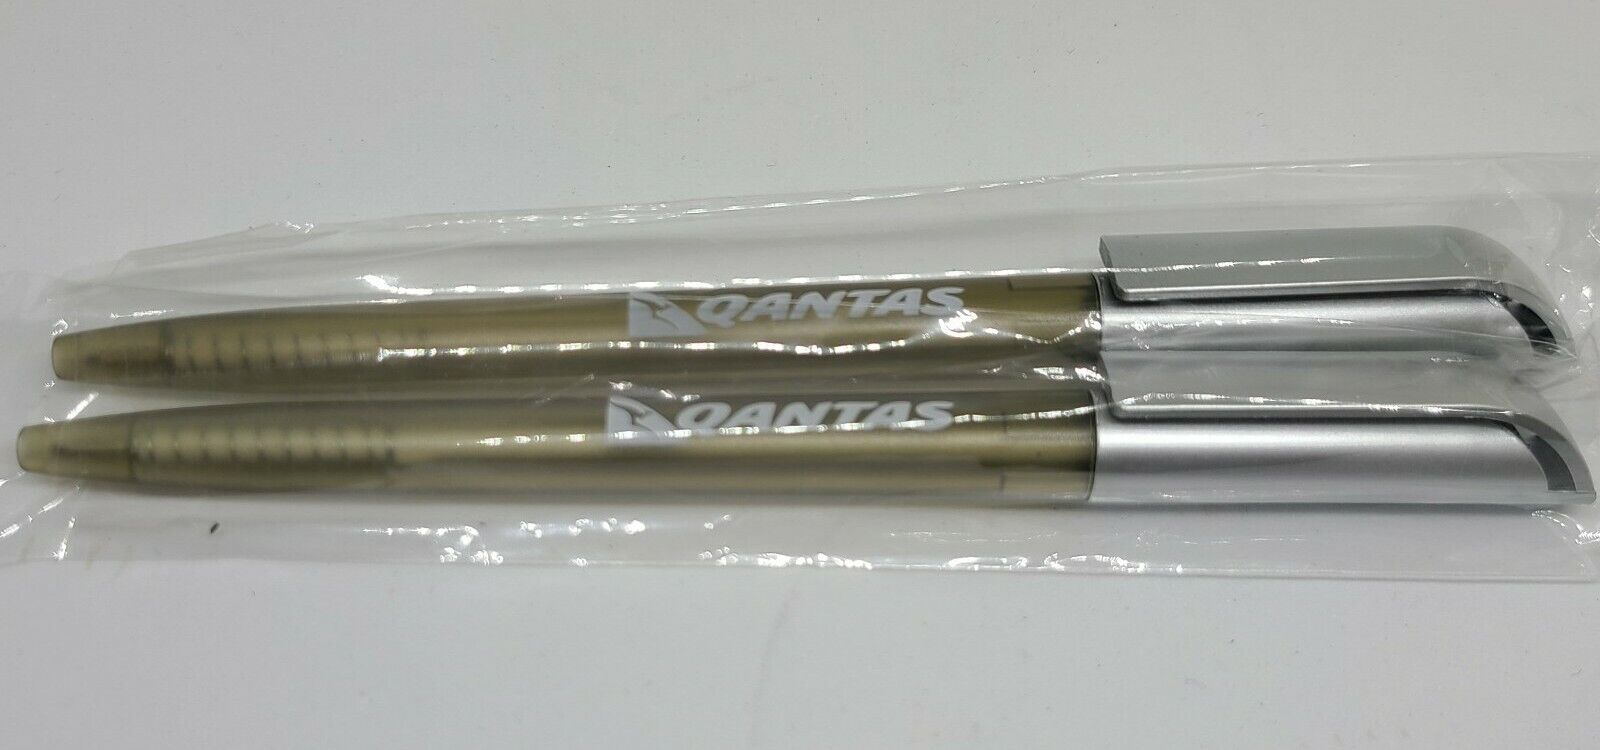 Qantas Airways Airline Collectible Vintage Business Class Pen Set of 2 - New